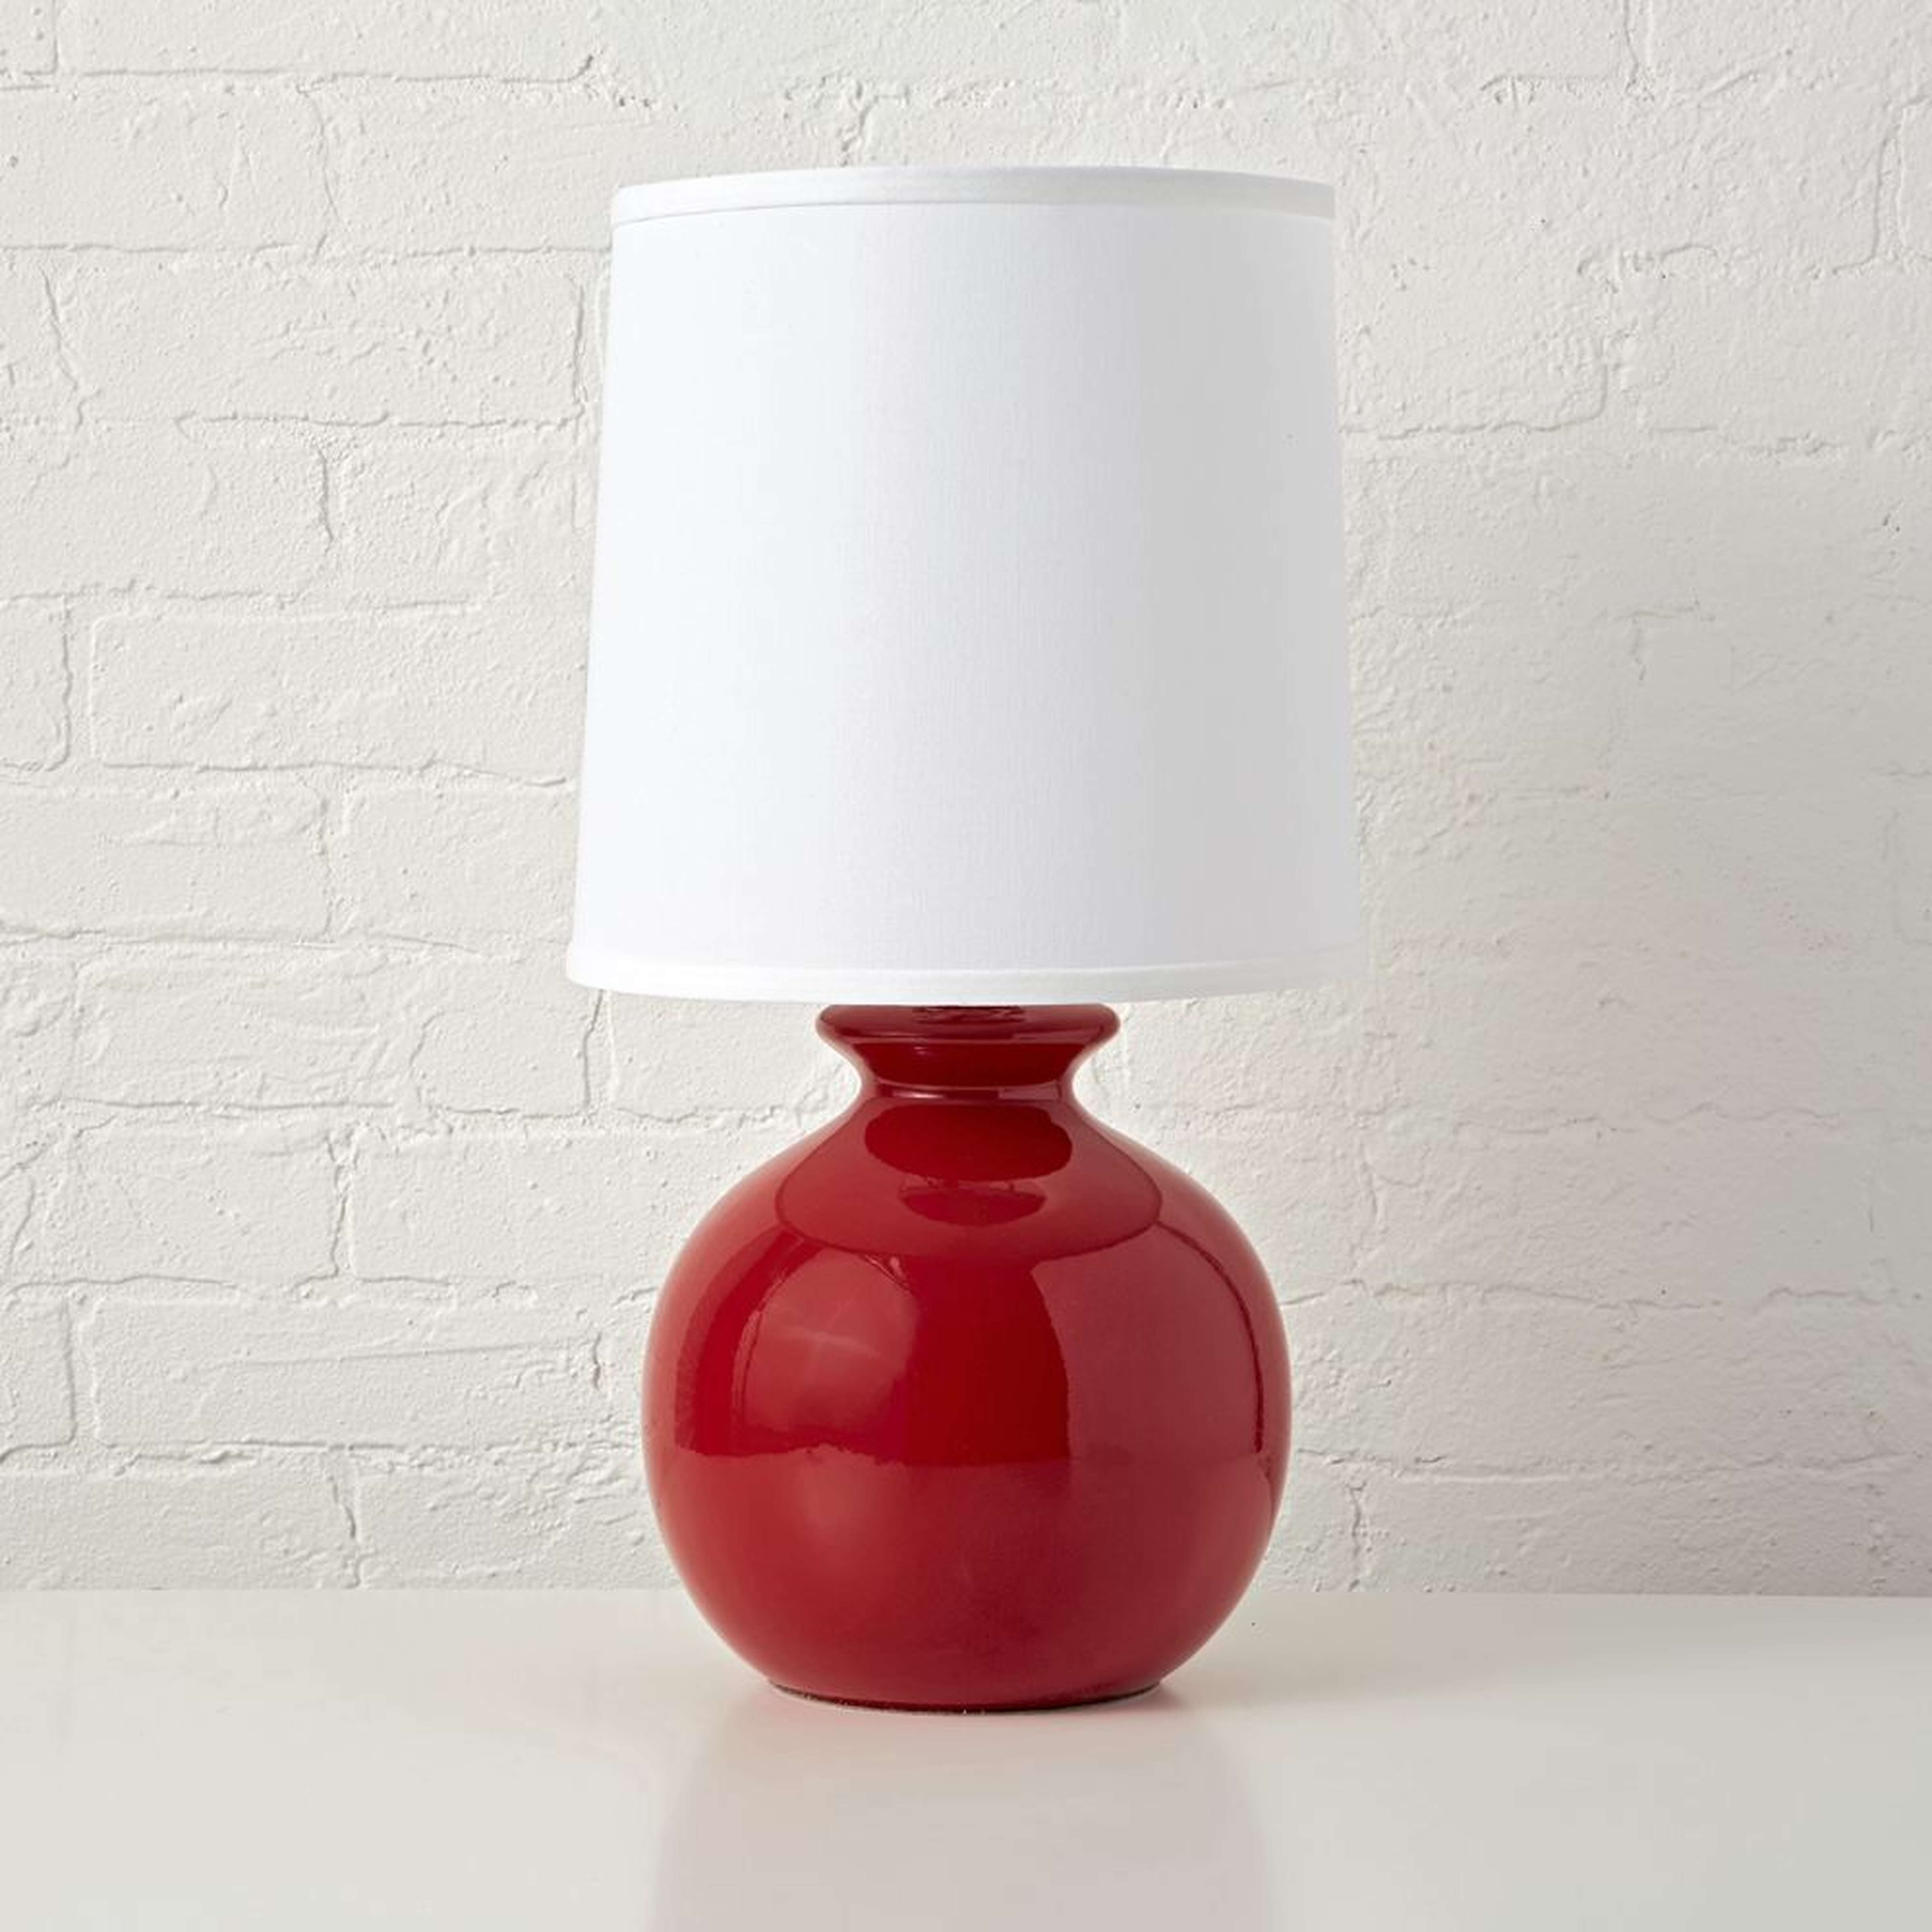 Gumball Red Table Lamp - Crate and Barrel